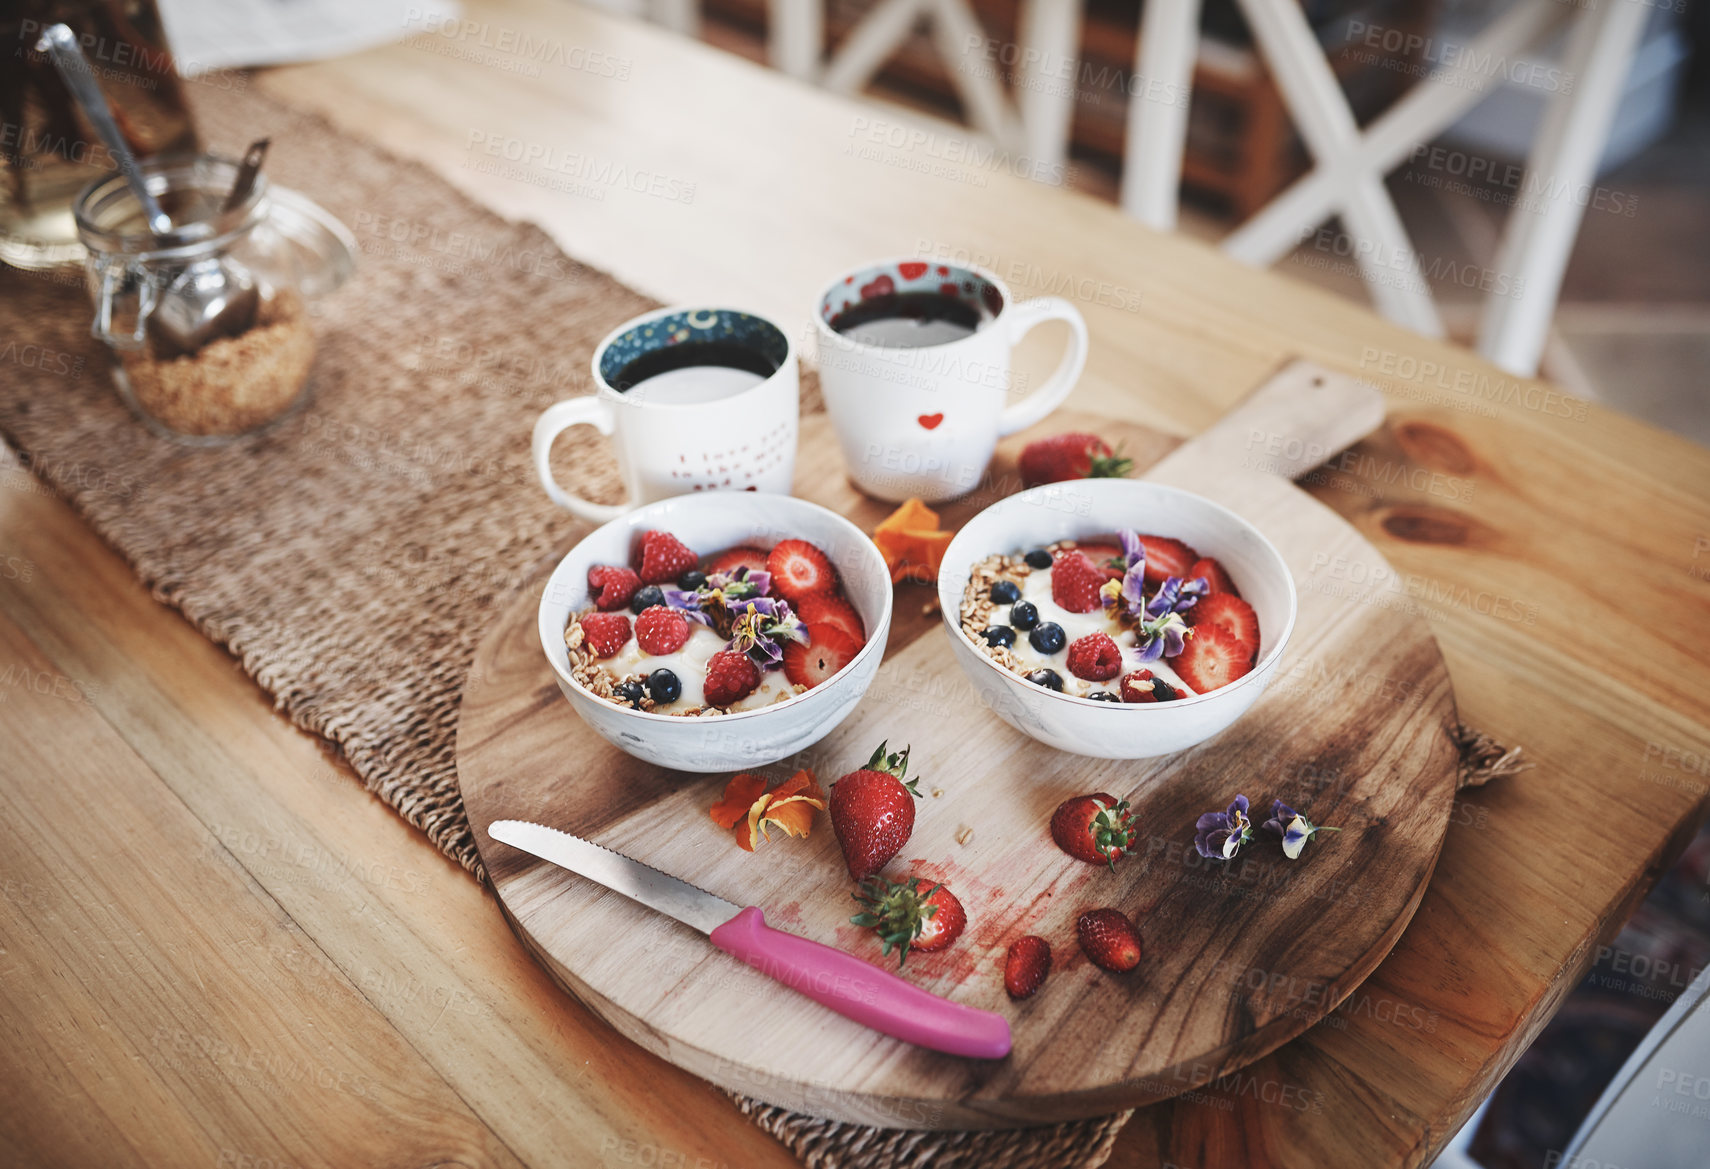 Buy stock photo Breakfast, muesli cereal and diet above on table of fruit, wheat or oats and organic food for wellness or at home. Bowls in brunch prepared with cup of coffee for dieting plan, nutrition or fibre